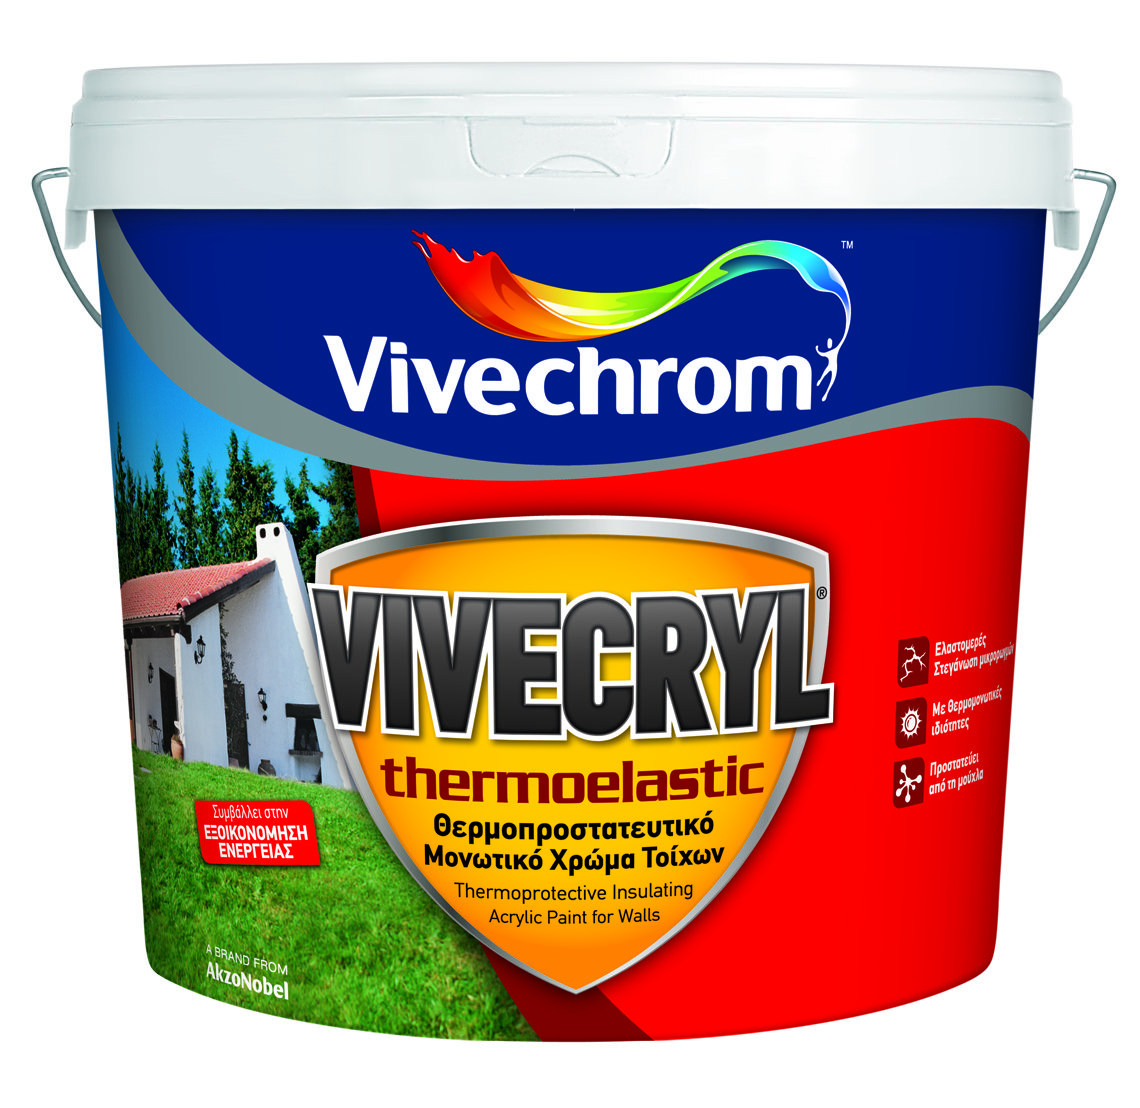 Vivechrom Vivecryl Thermoelastic Matt Finish Mixing Base D 3L